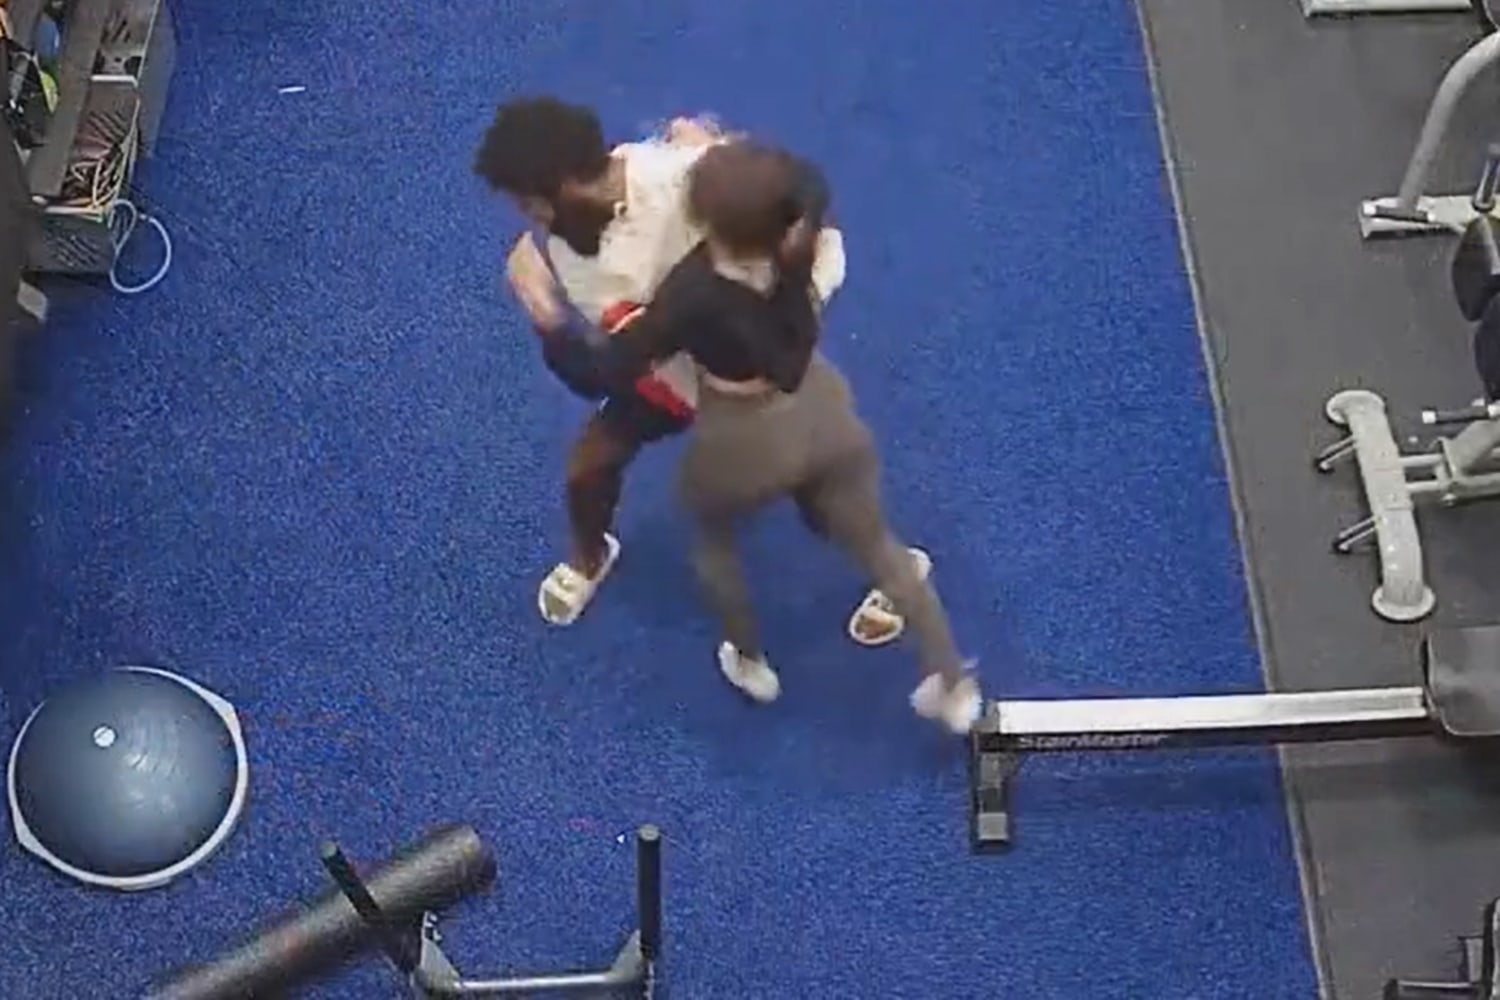 Woman fights off a man at a Florida gym in dramatic video picture